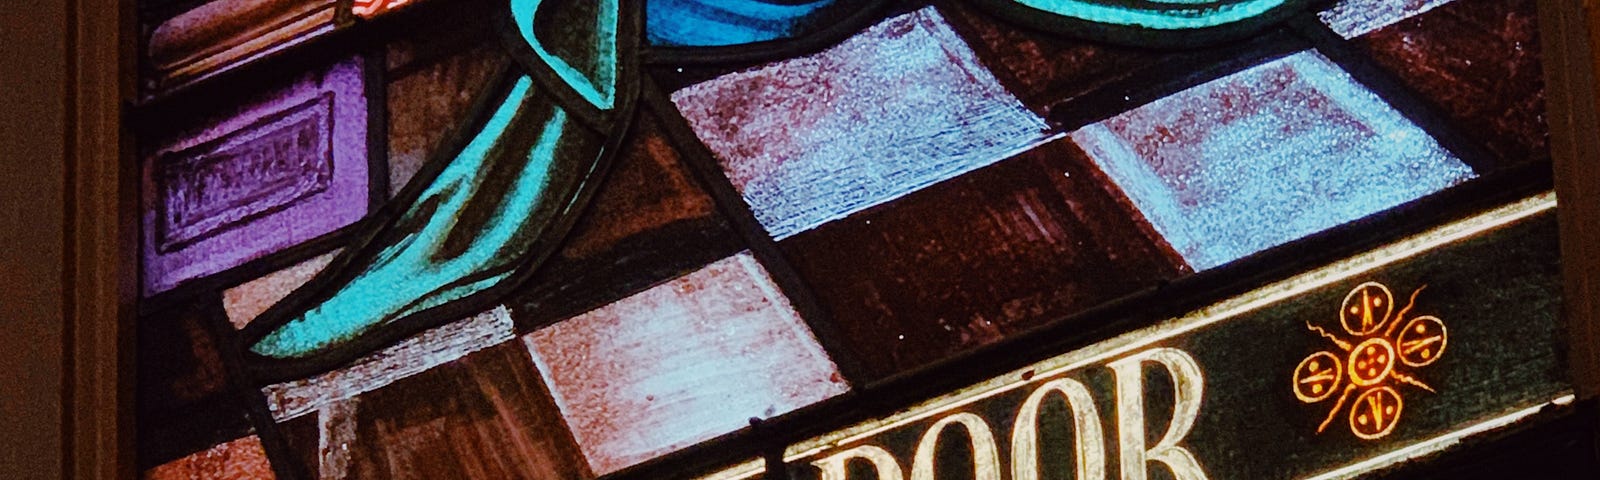 A stained glass church window; a depiction of Jesus Christ with the words ‘For The Poor’ inscribed below.